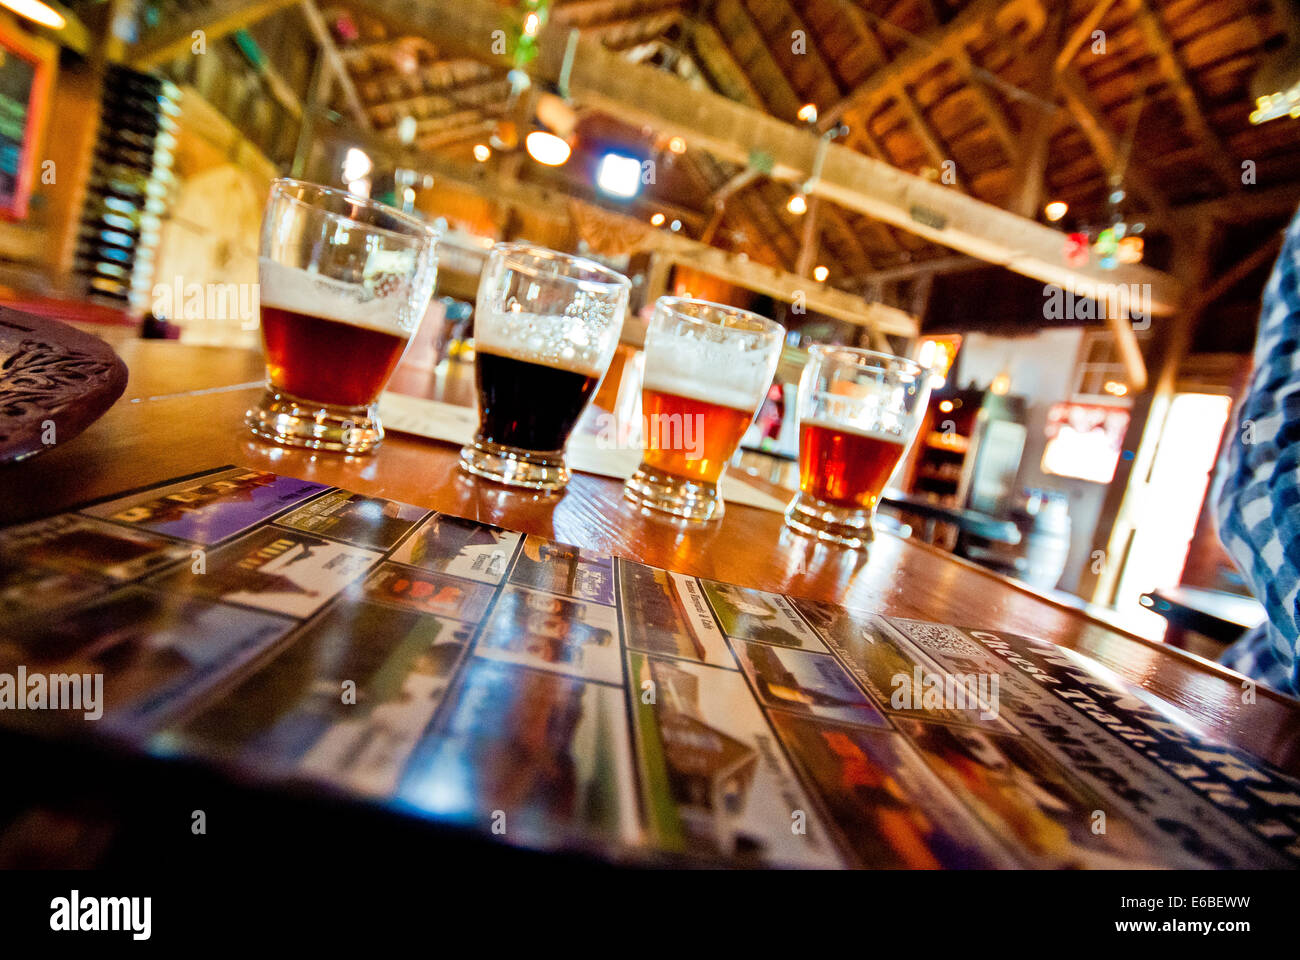 View of the glasses during the beer tasting at craft beer event. Stock Photo